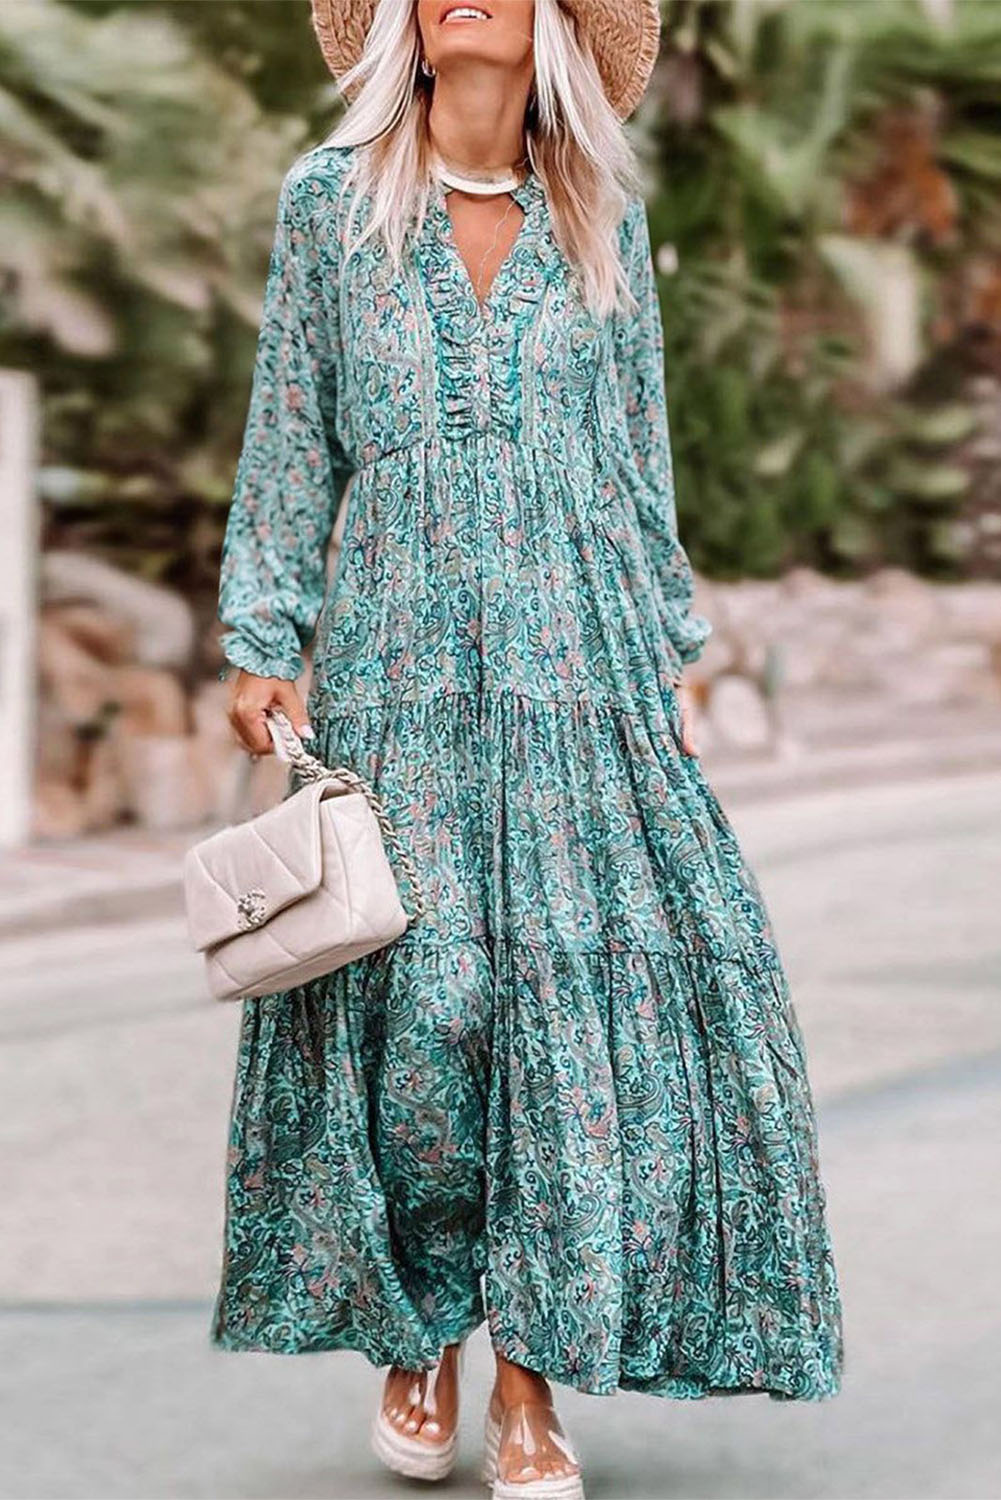 Shewin Wholesale Southern Clothes Sky Blue Bohemian Paisley Print Long Sleeve Tiered Maxi DRESS